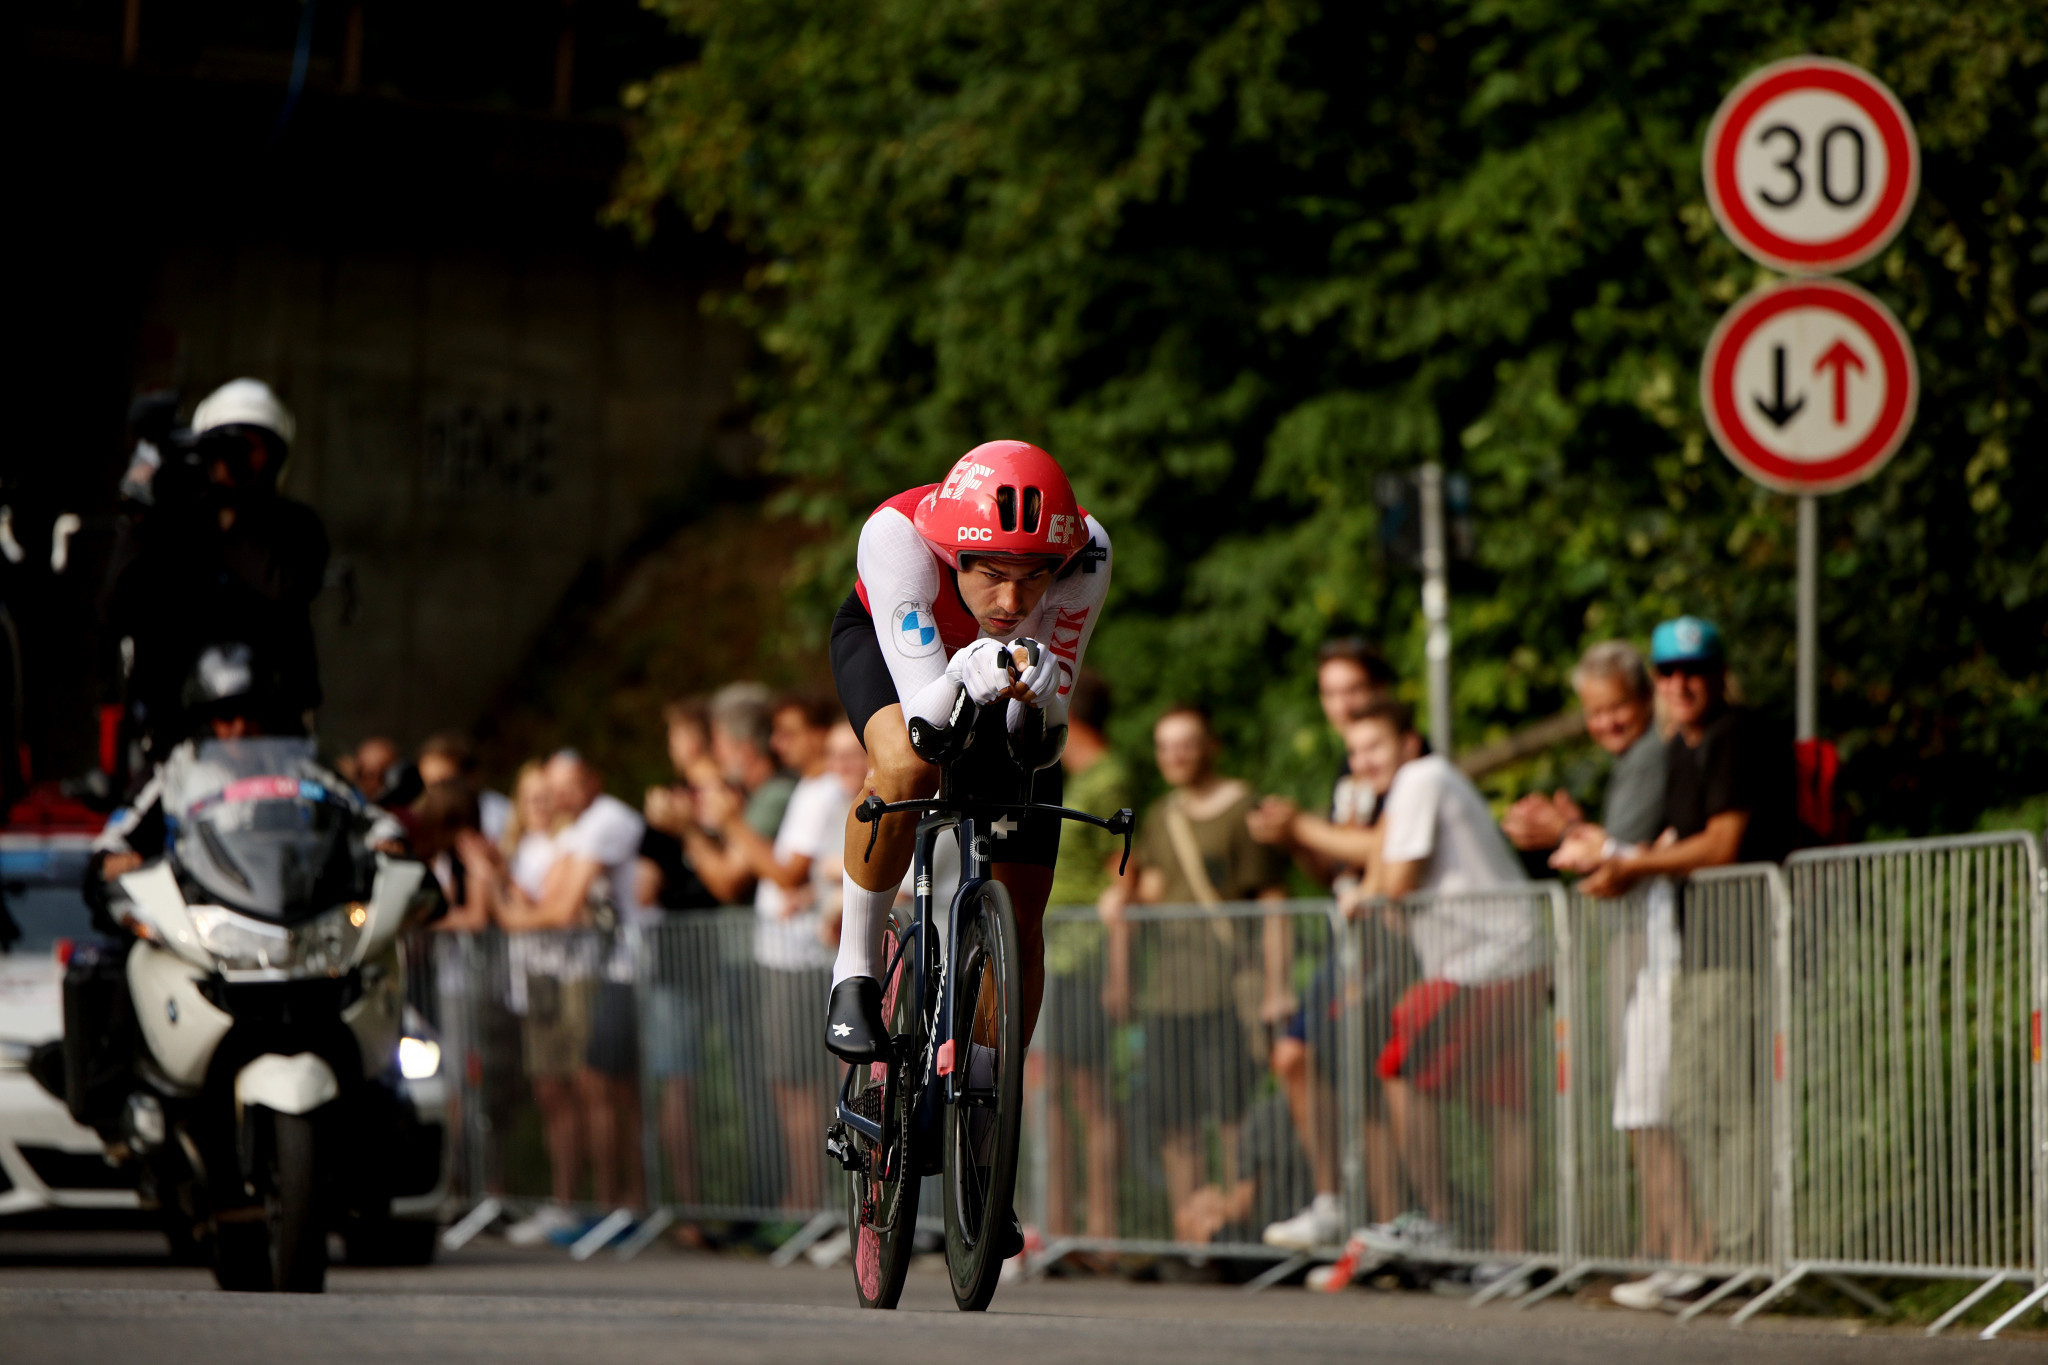 Bissegger and Reusser clinch Swiss time trial double at Munich 2022 European Championships